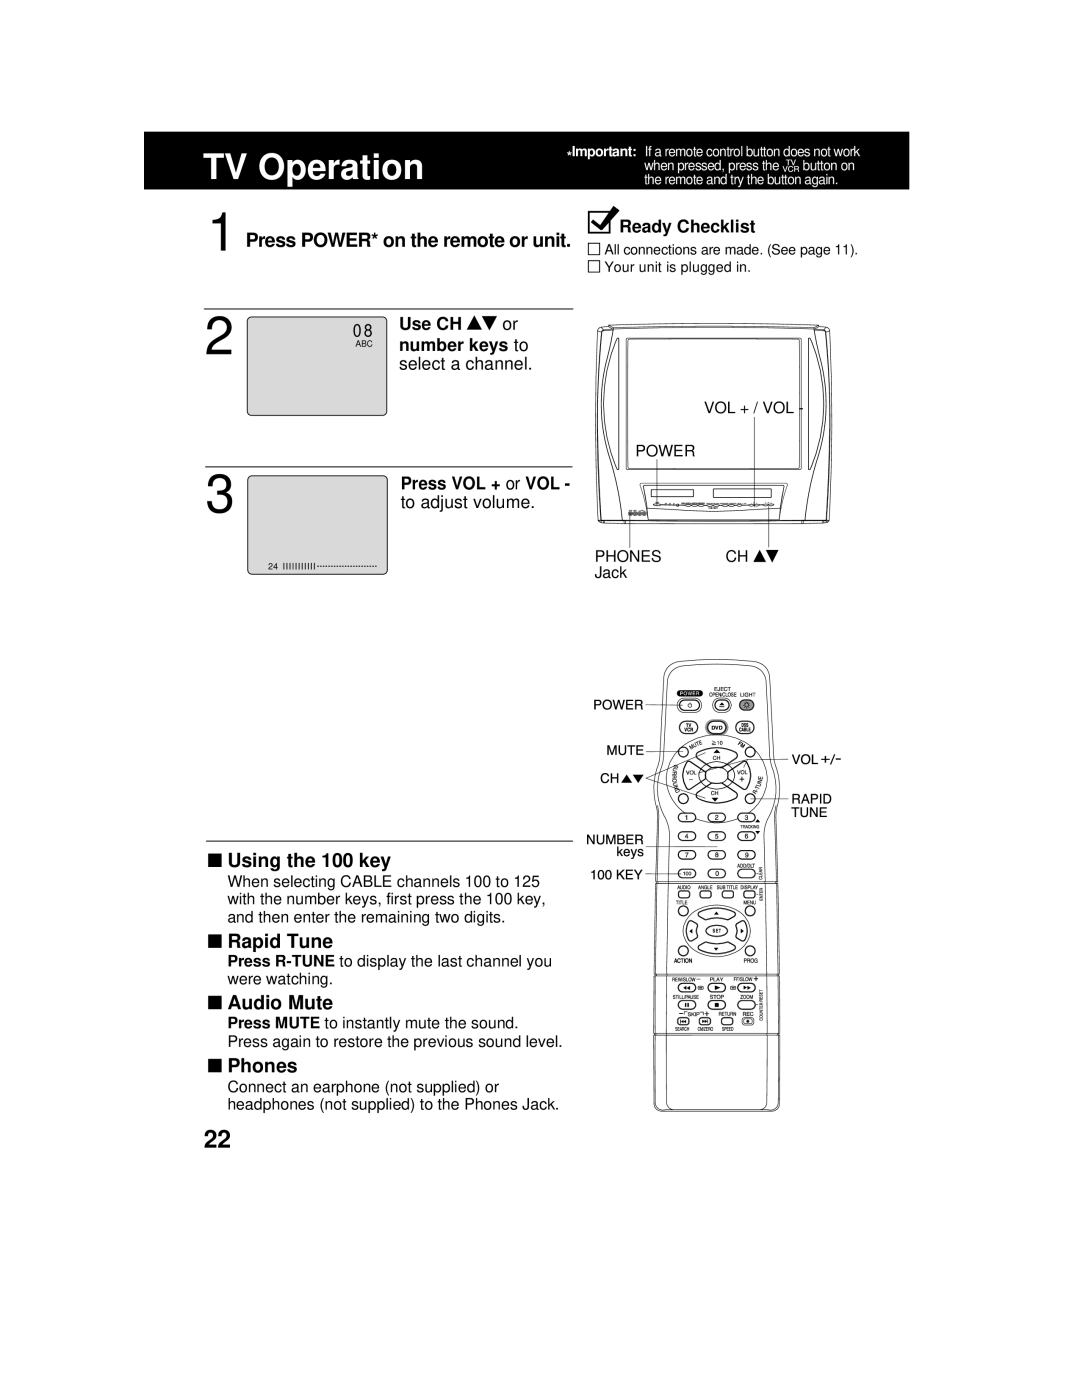 Panasonic AG 527DVDE TV Operation, Using the 100 key, Rapid Tune, Audio Mute, Phones, Press POWER* on the remote or unit 